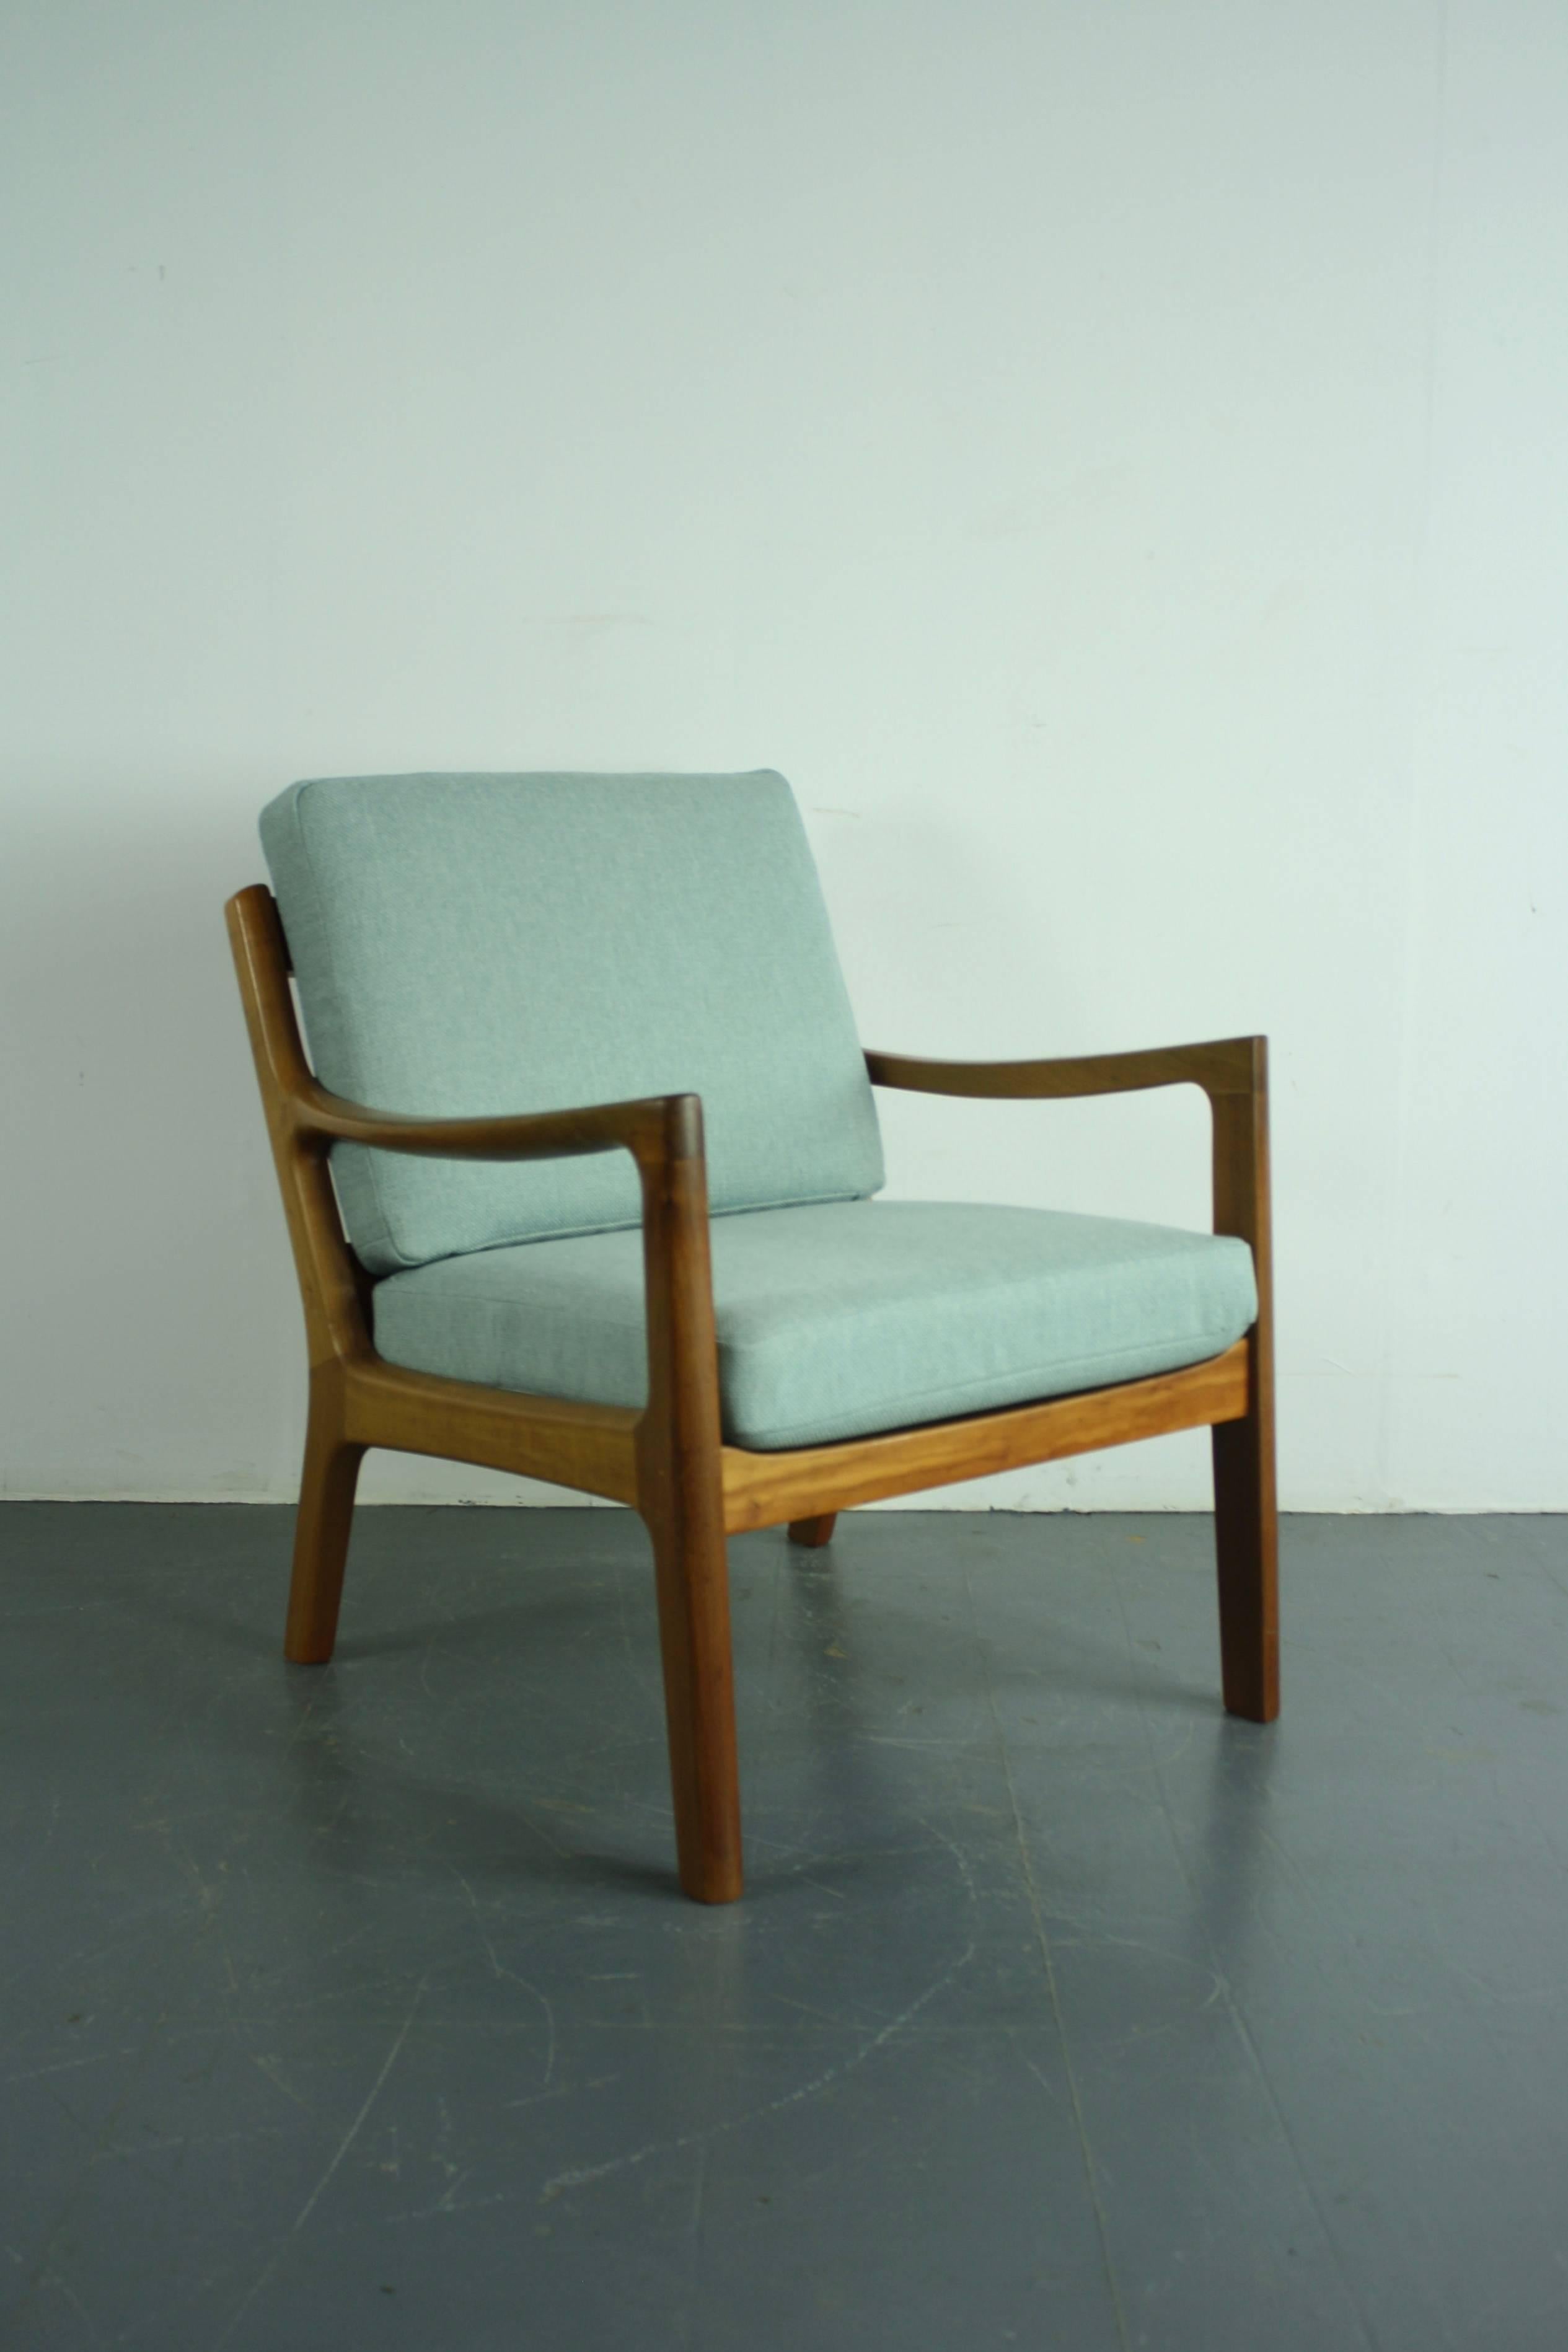 1960s teak lounge chair designed by Ole Wanscher for Peter Jeppeson. Solid teak, with beautifully designed curved arms. With two thick spring-loaded cushions, making the chair supremely comfortable, which have been newly upholstered in a beautiful